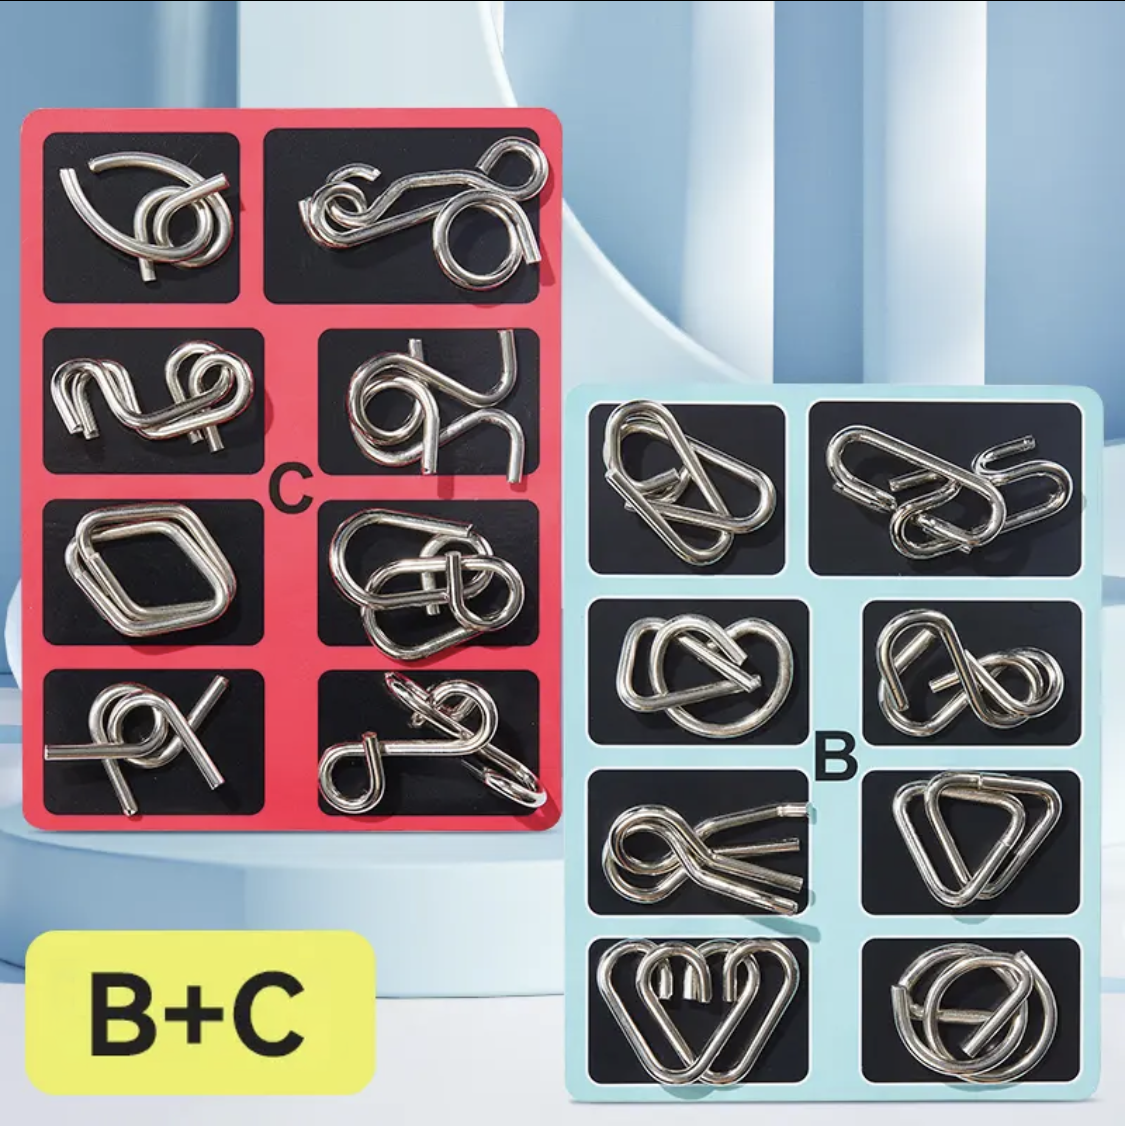 Nine Linked Rings - Entry-Level Puzzle for Unlocking and Assembling Metal Rings